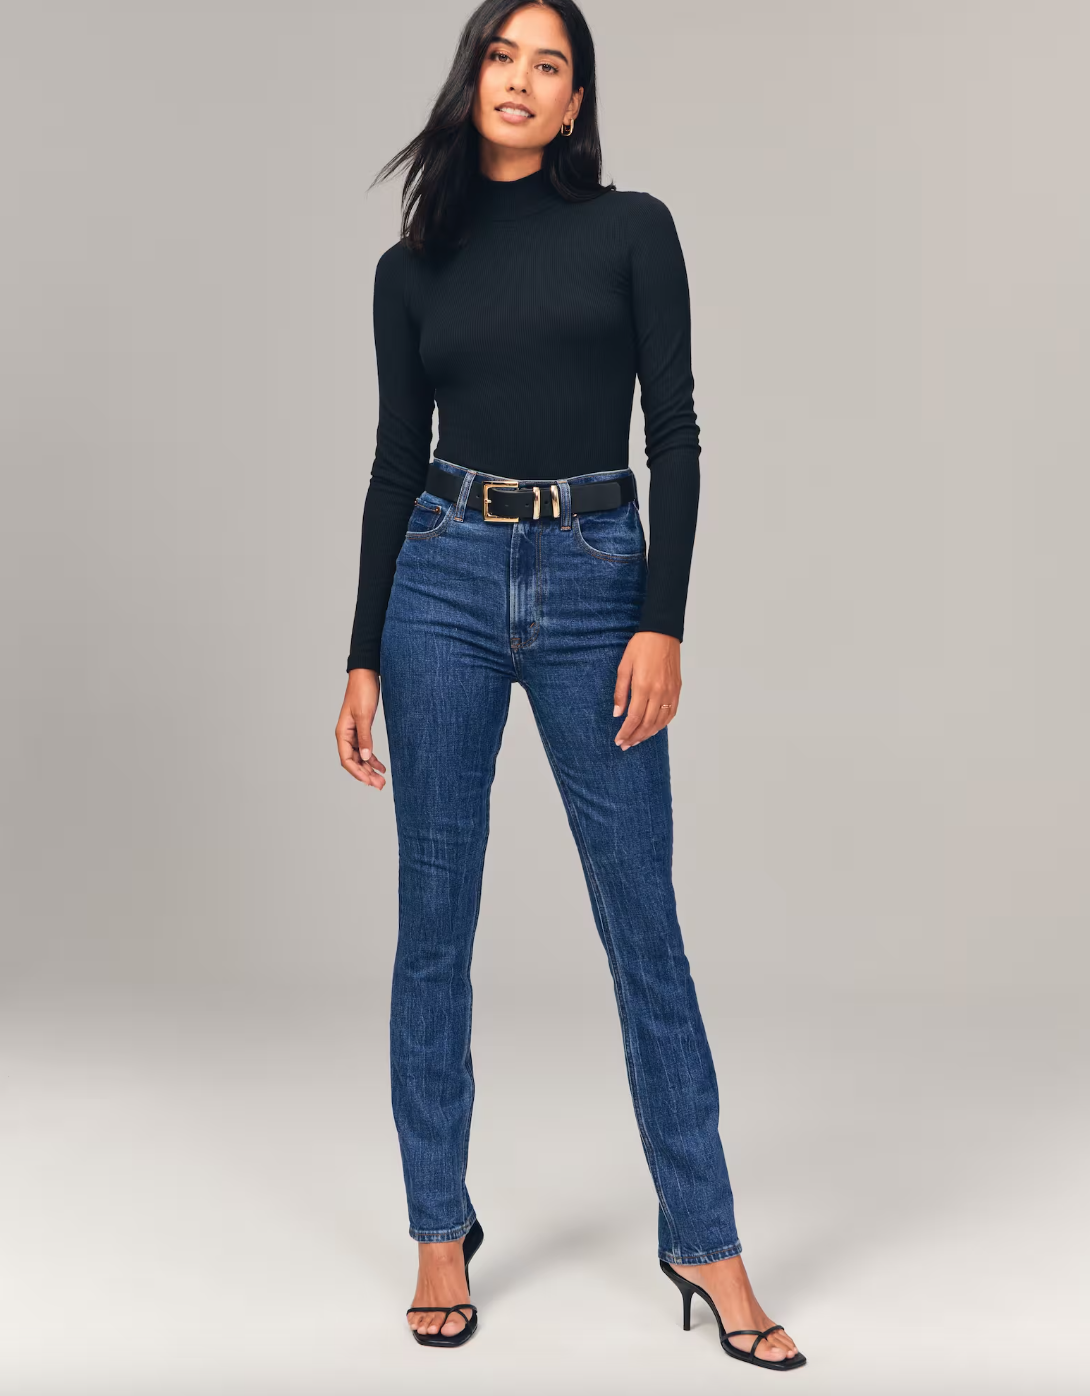 The Best Tops to Wear with high Waisted Jeans | goop